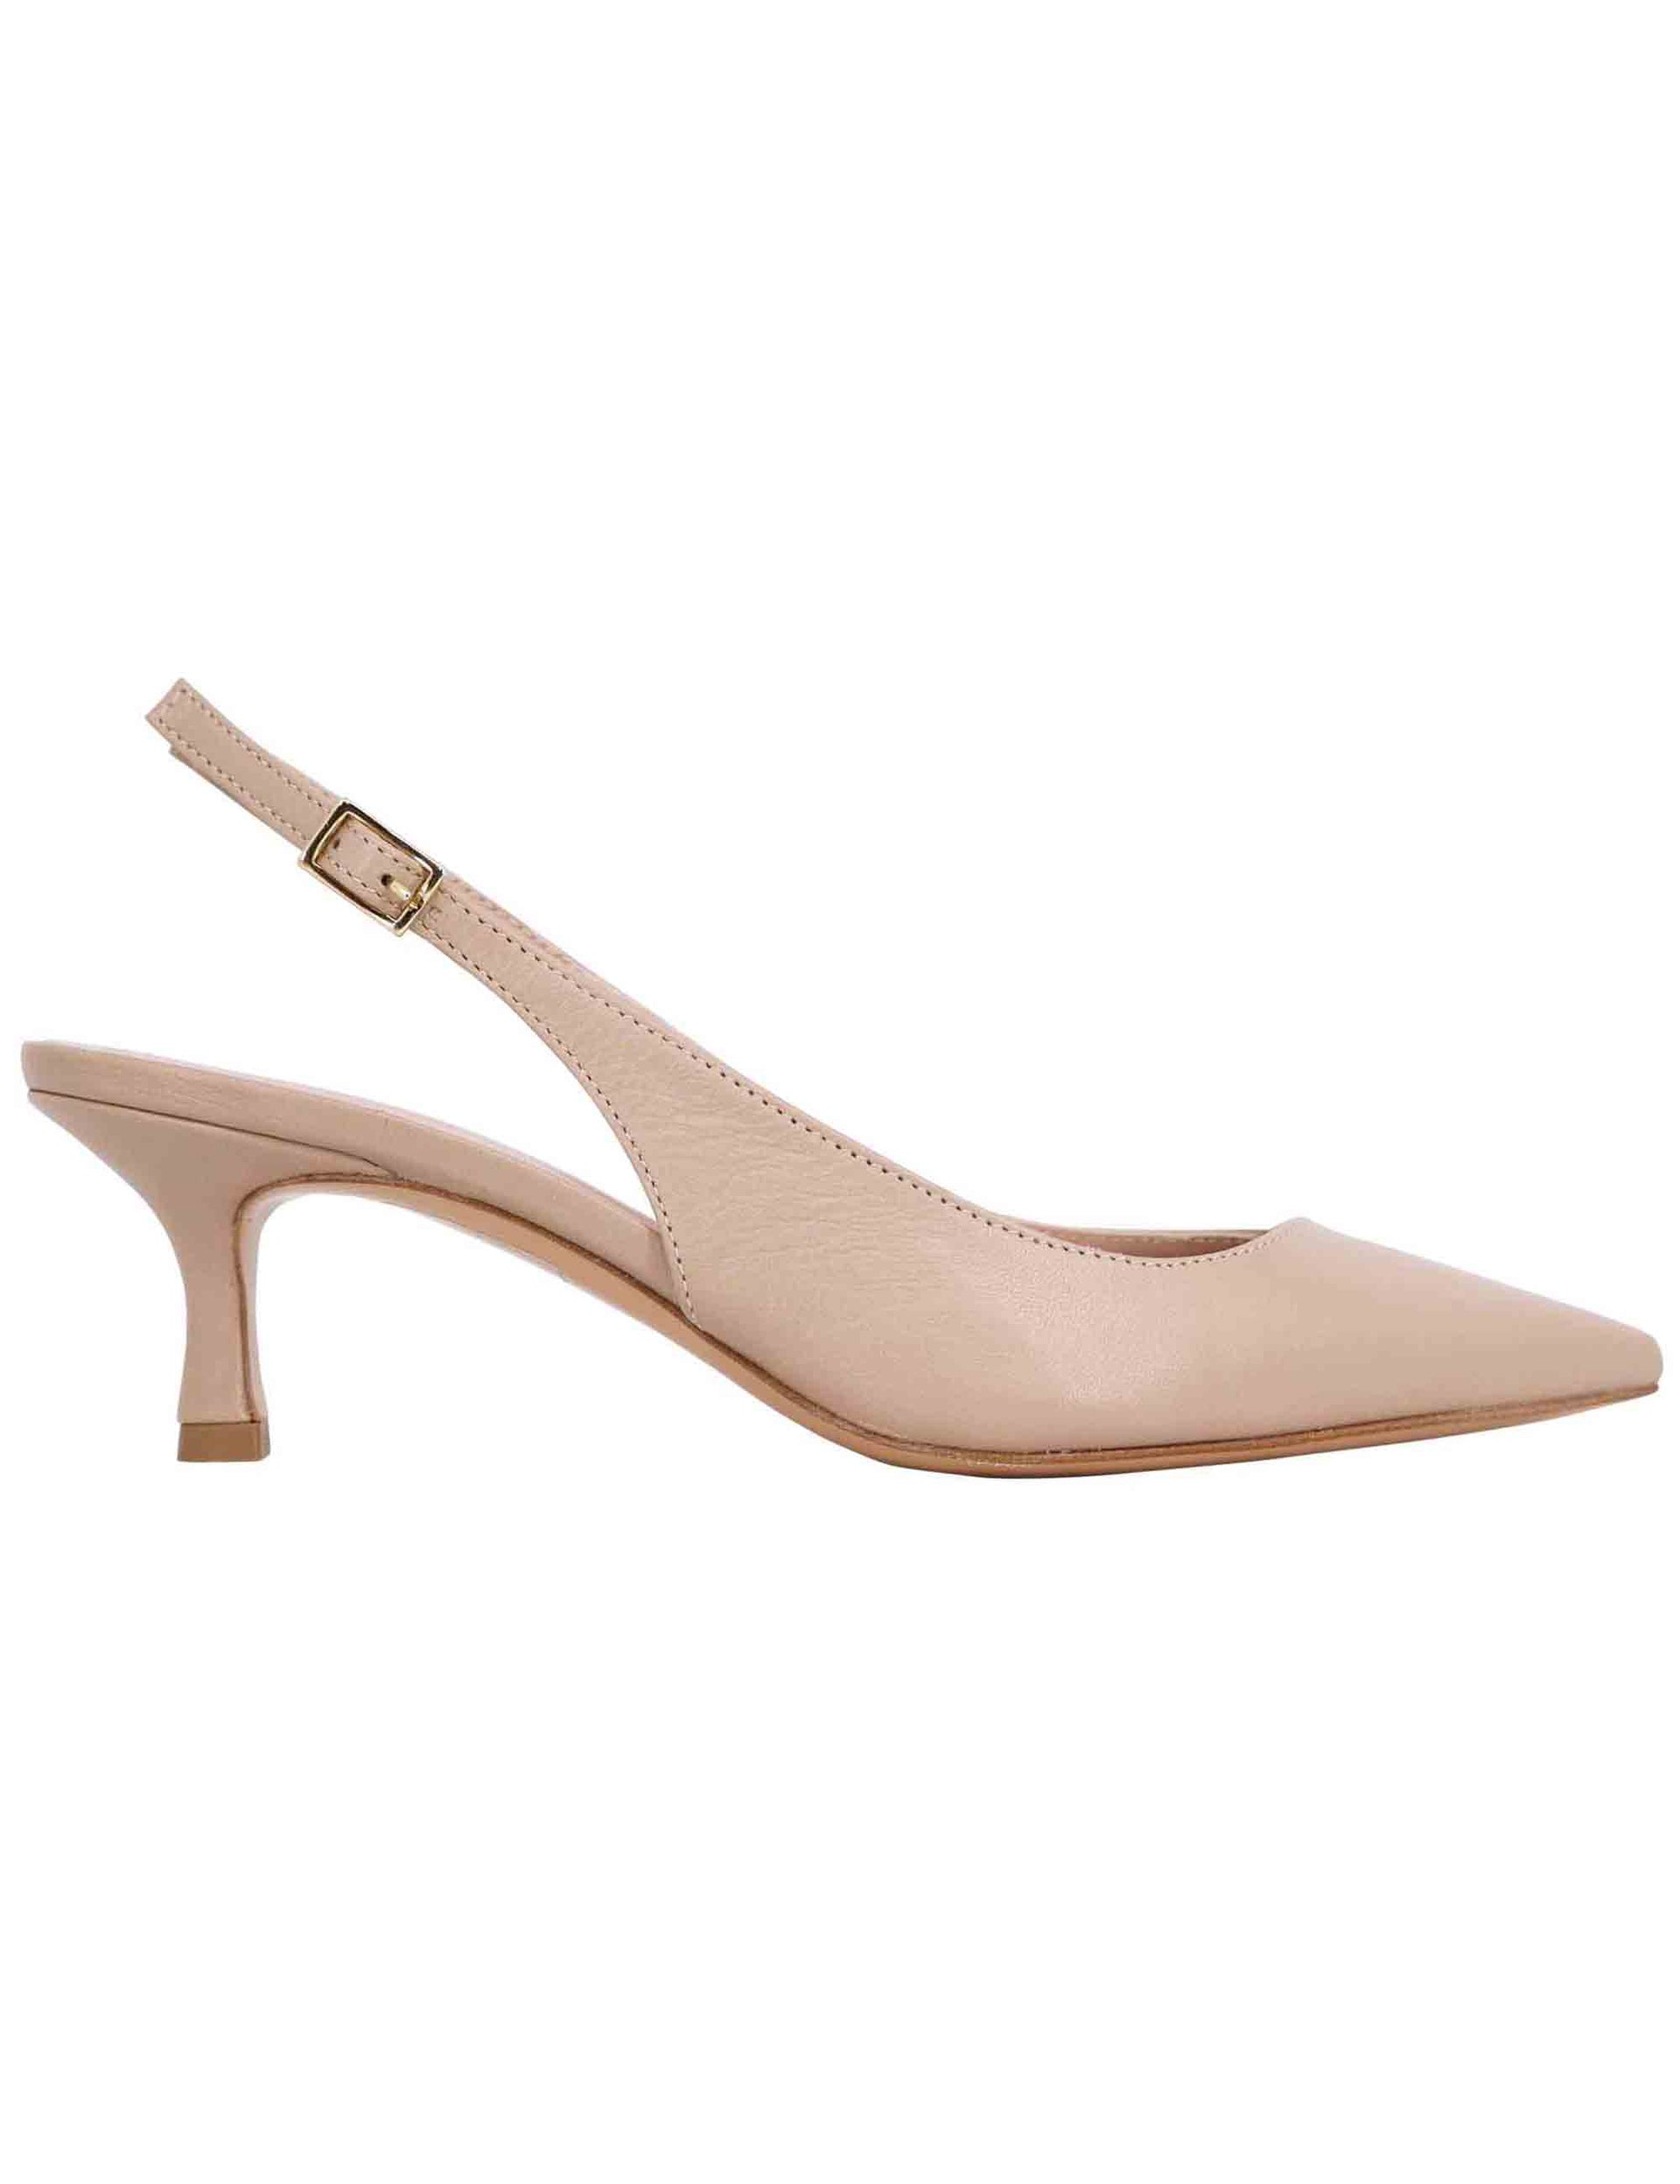 Women's slingback pumps in taupe leather with low heel